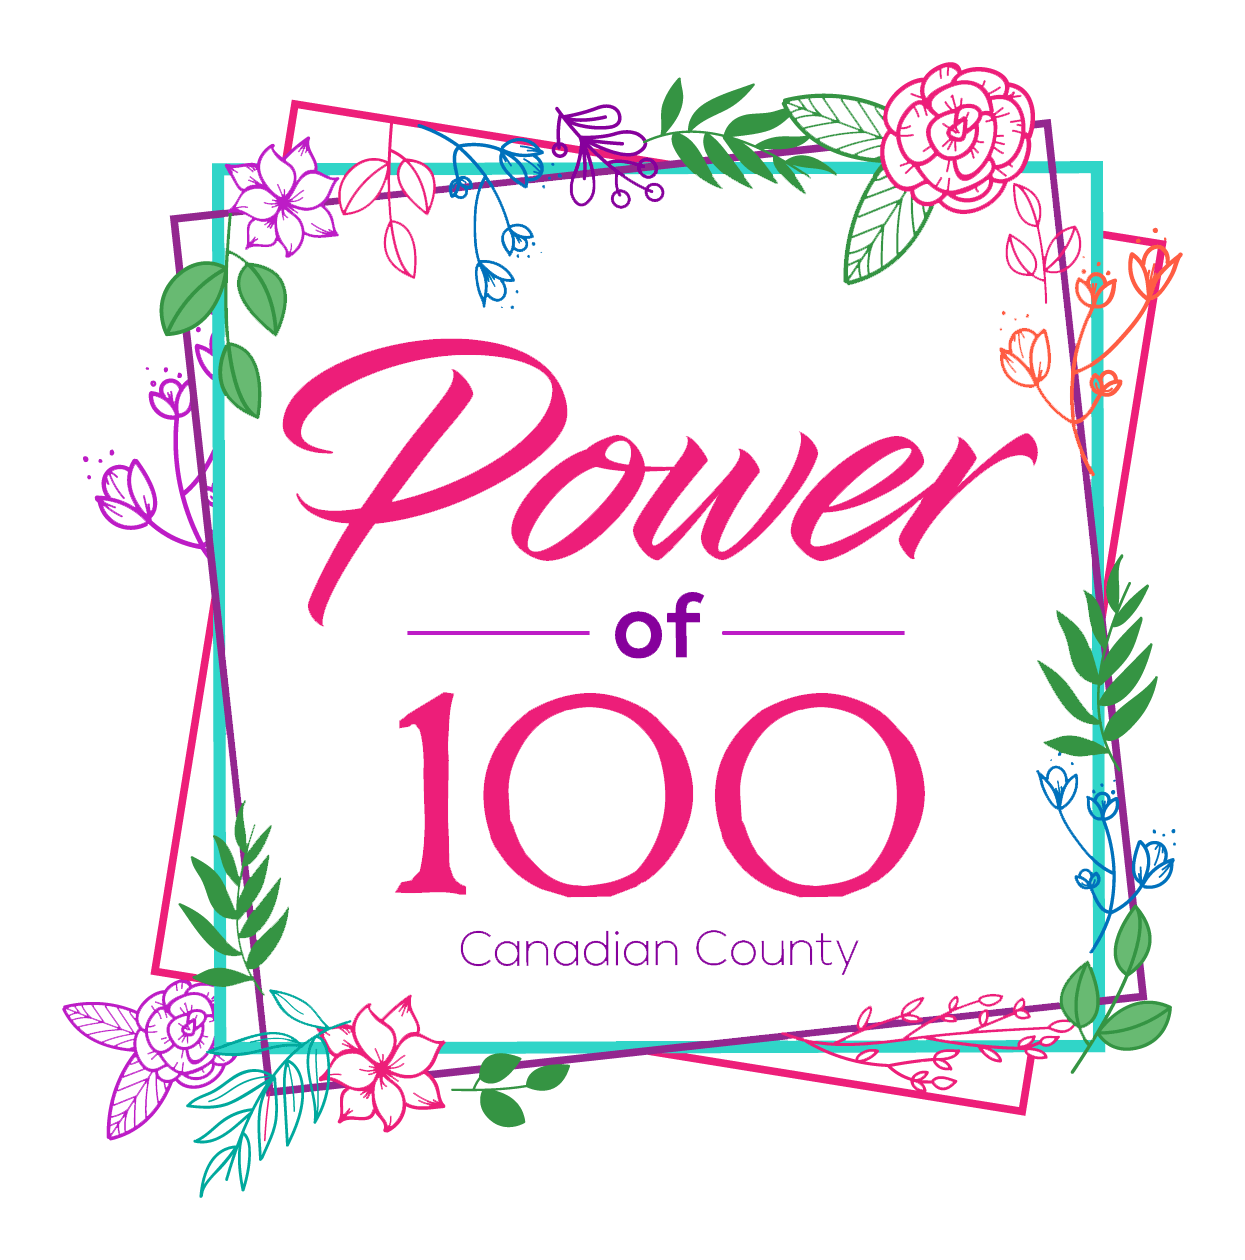 It is a logo for the power of 100.